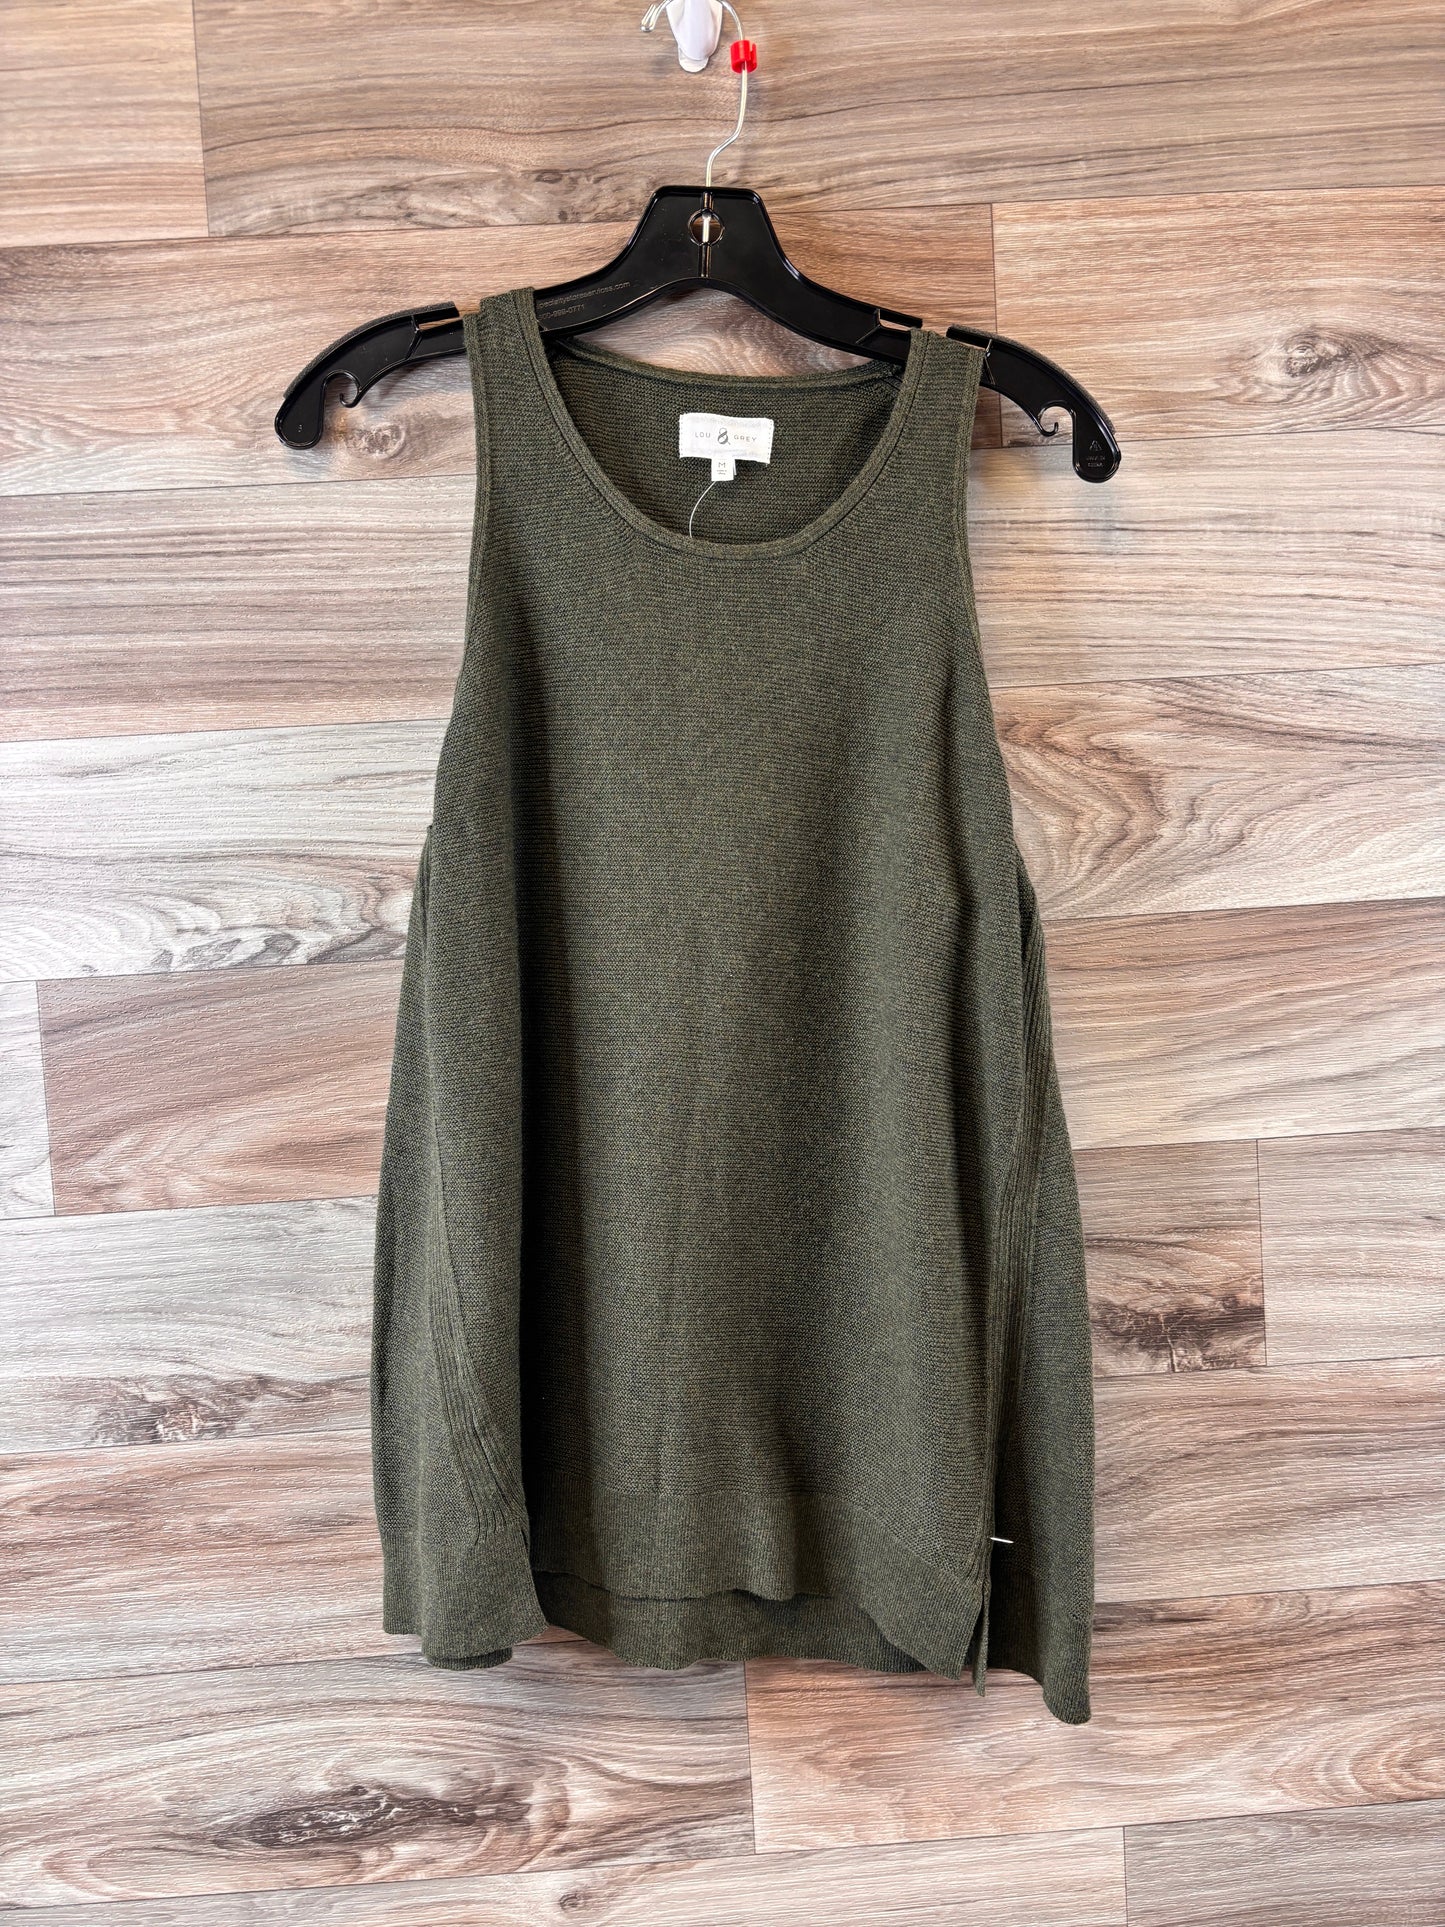 Green Top Sleeveless Lou And Grey, Size M